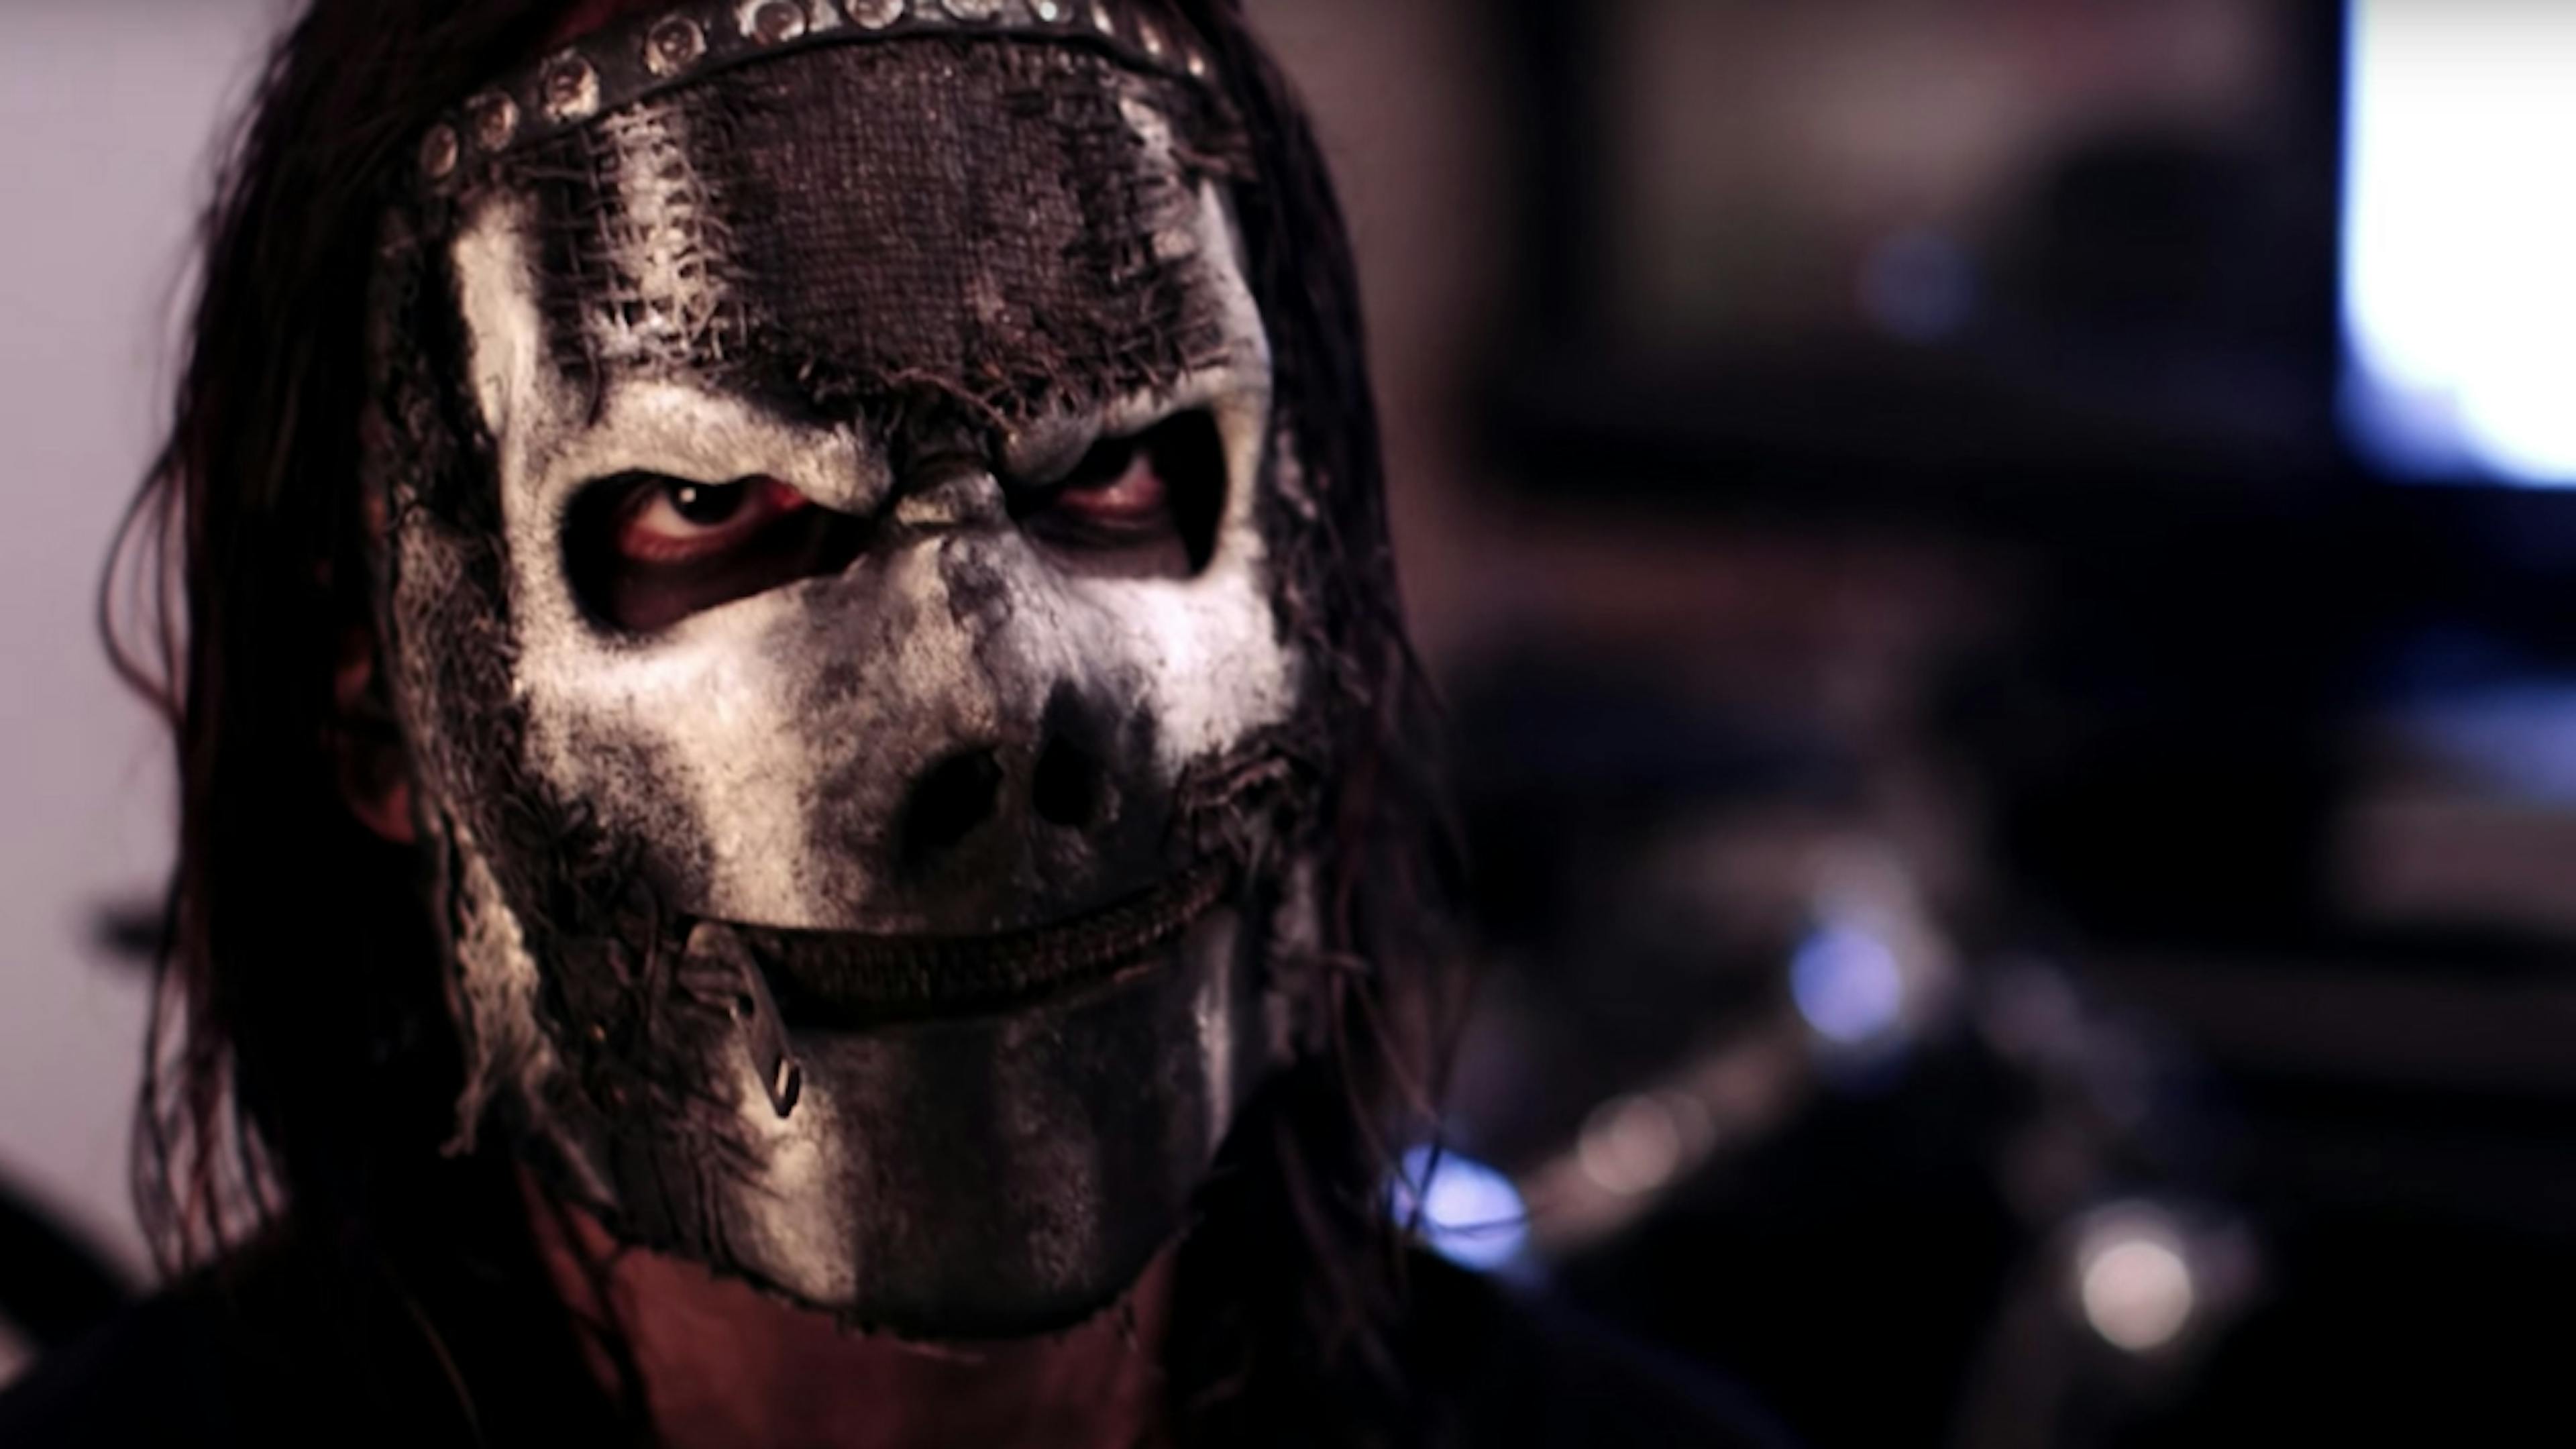 "Slipknot Consumes My Life": Drummer Jay Weinberg Talks Audition Process, His Love For The Band And More